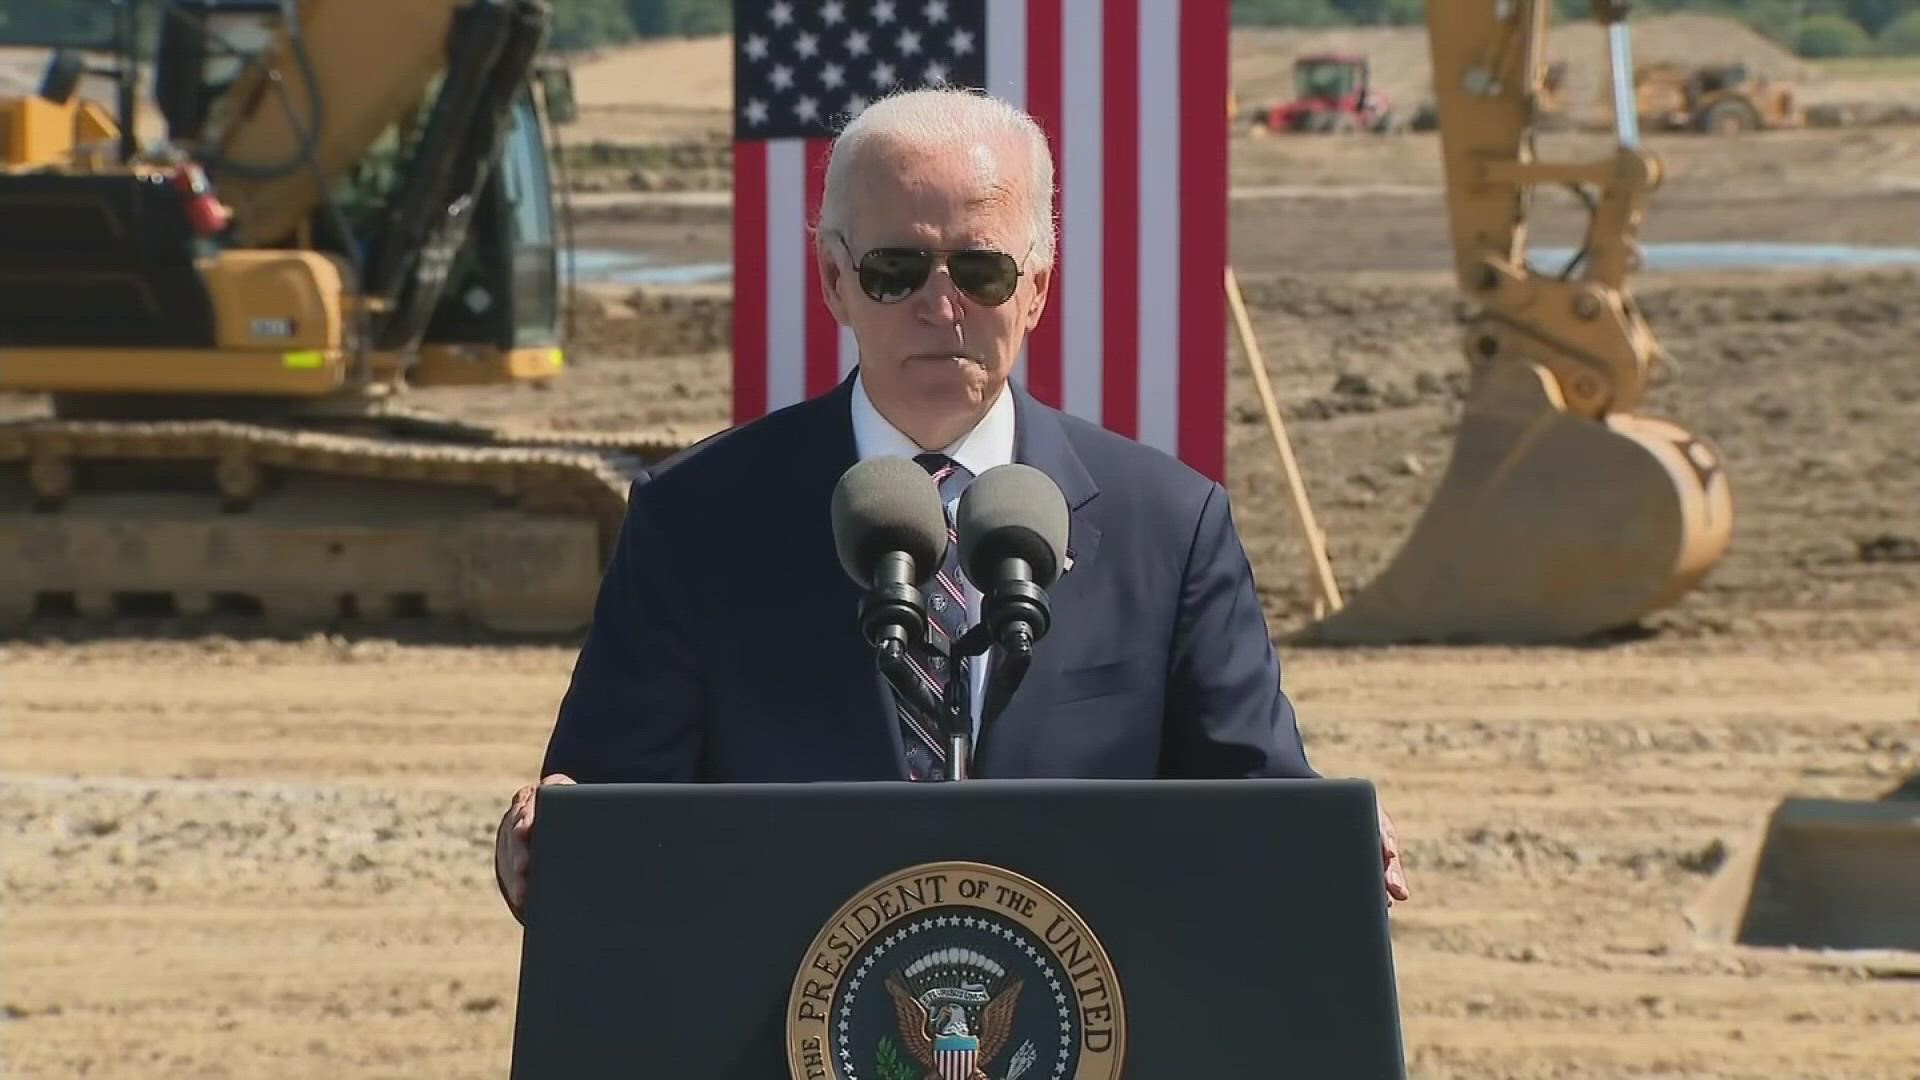 A groundbreaking ceremony was held in New Albany with President Joe Biden, Governor Mike DeWine and other state and local leaders in attendance.